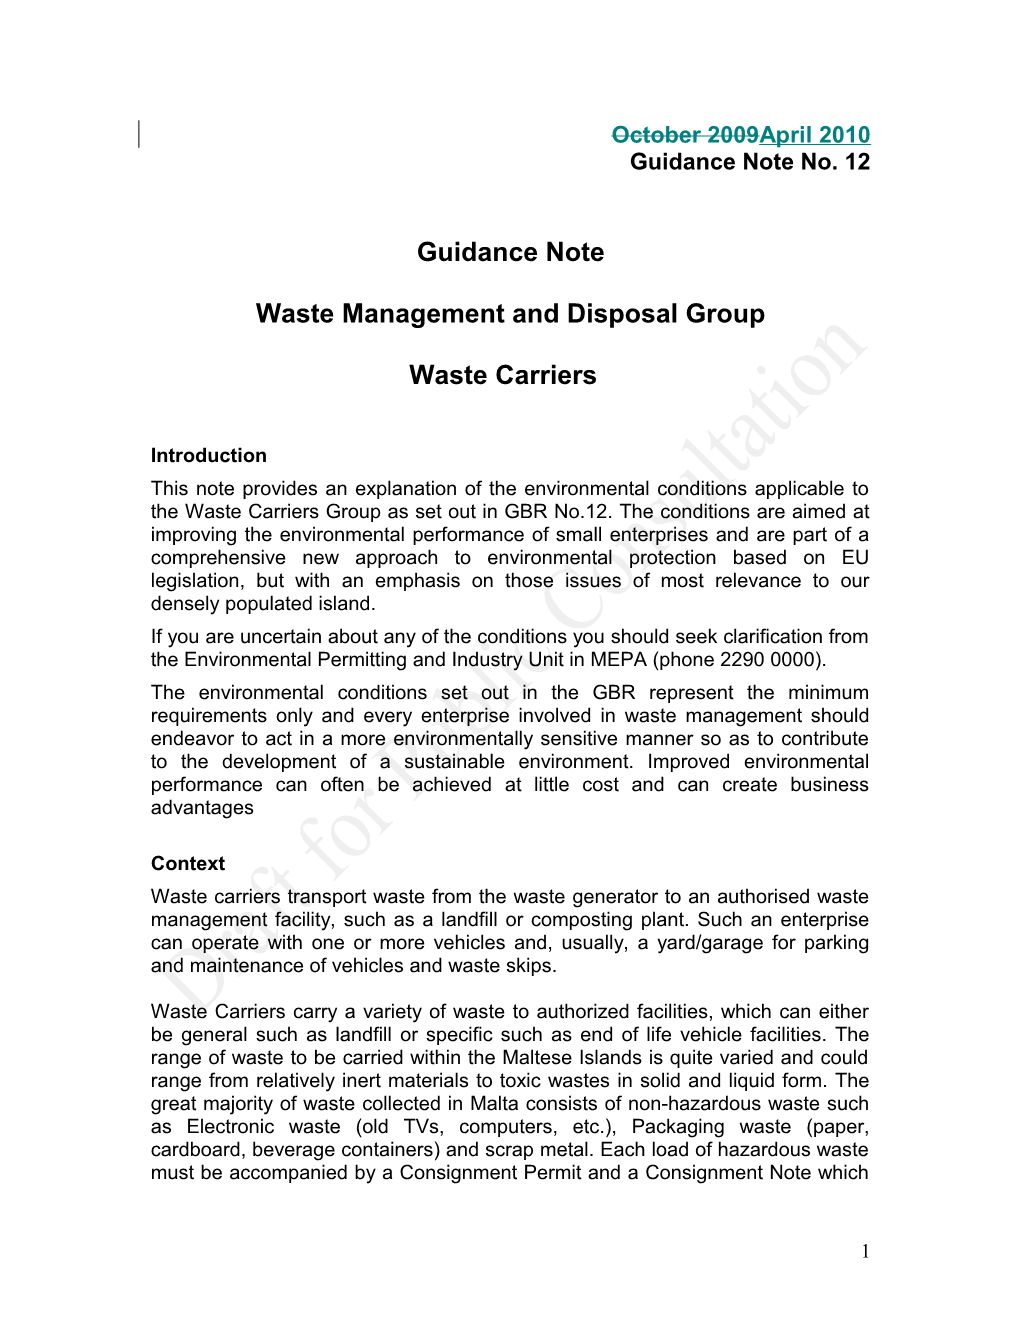 Guidance Note Waste Carriers